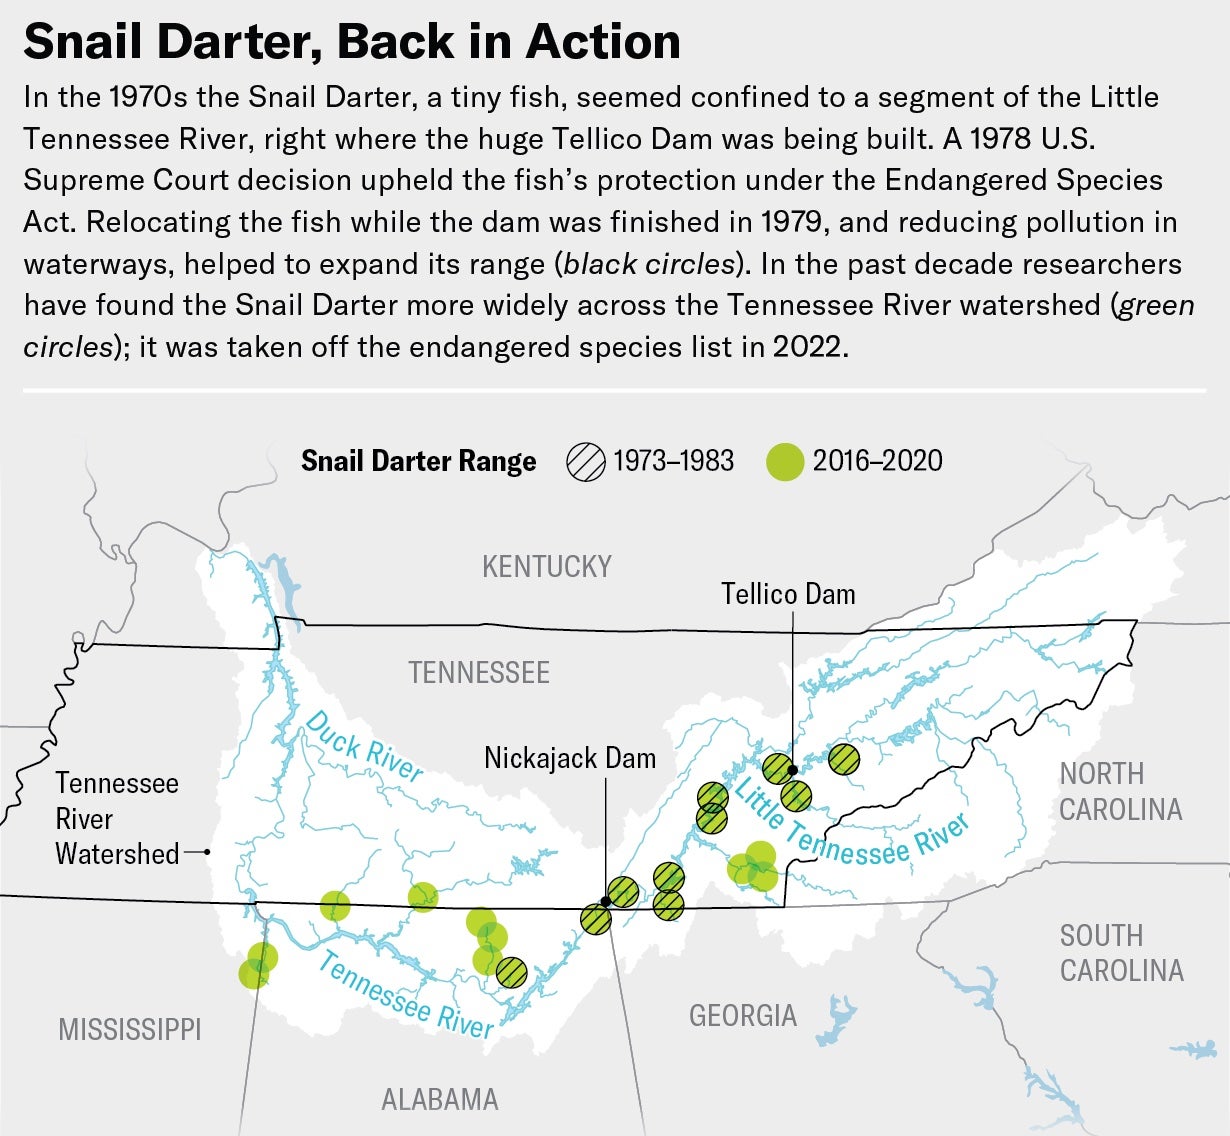 Map of Tennessee and bordering states shows Snail Darter range from 1973 to 1983 and from 2016 to 2020, highlighting how protection under the Endangered Species Act helped the previously endangered fish expand its range across the Tennessee River watershed.